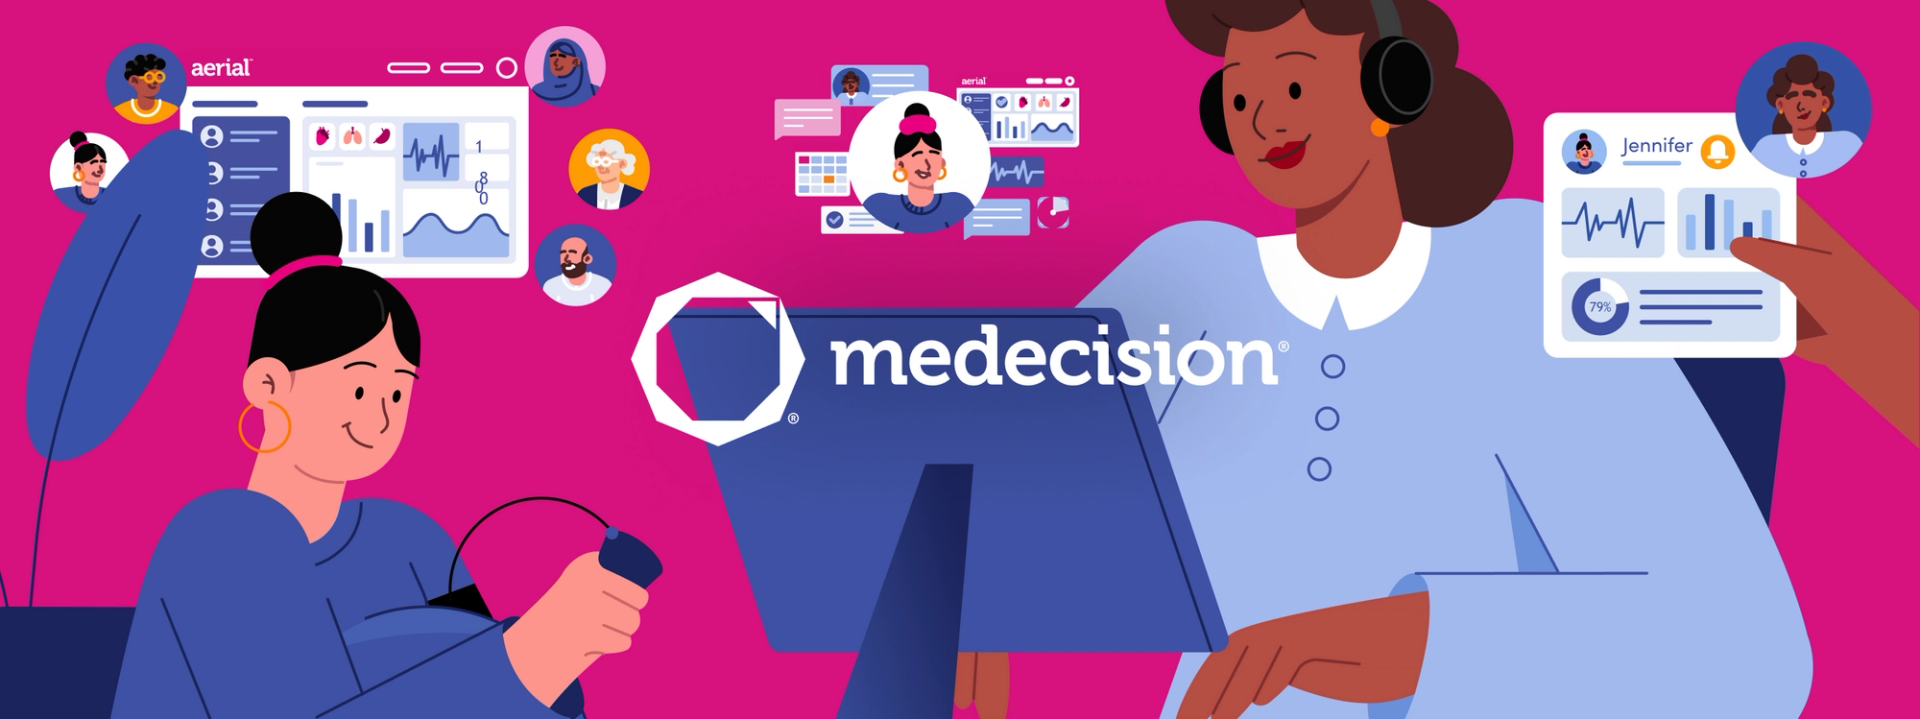 Medecision and Superside: Illustrating Healthcare Innovation Through Animation